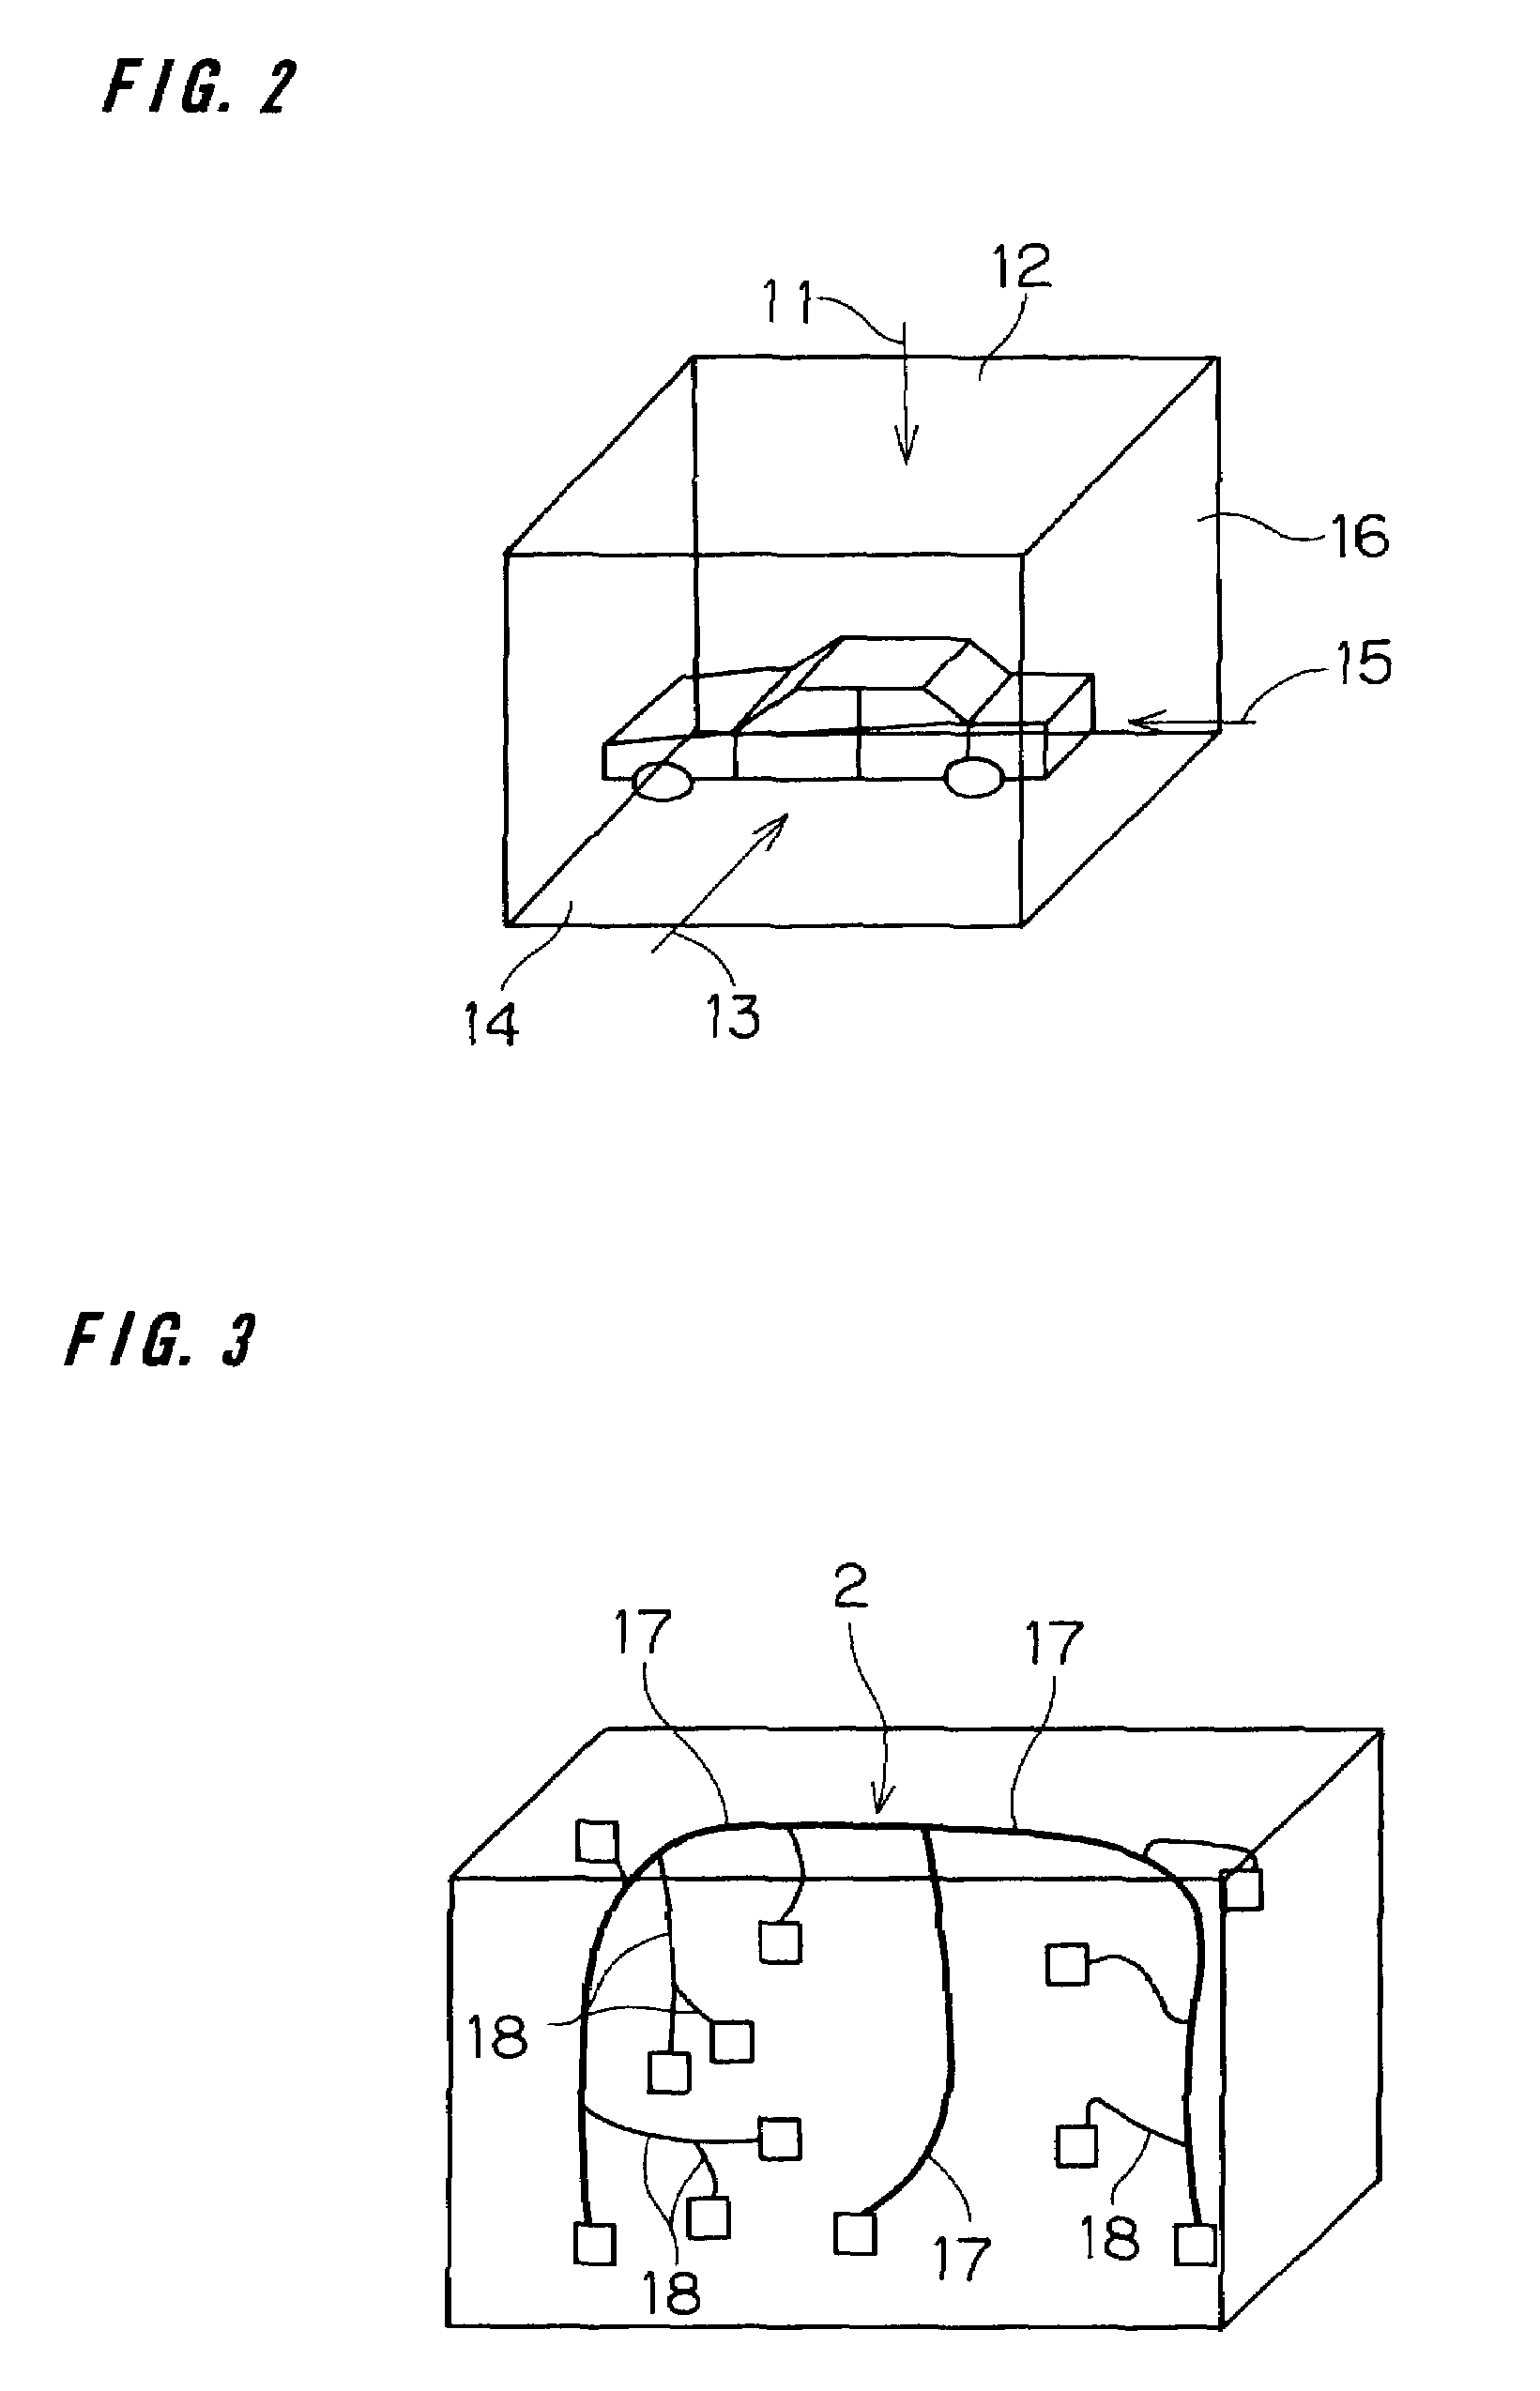 Wire harness design supporting method and program